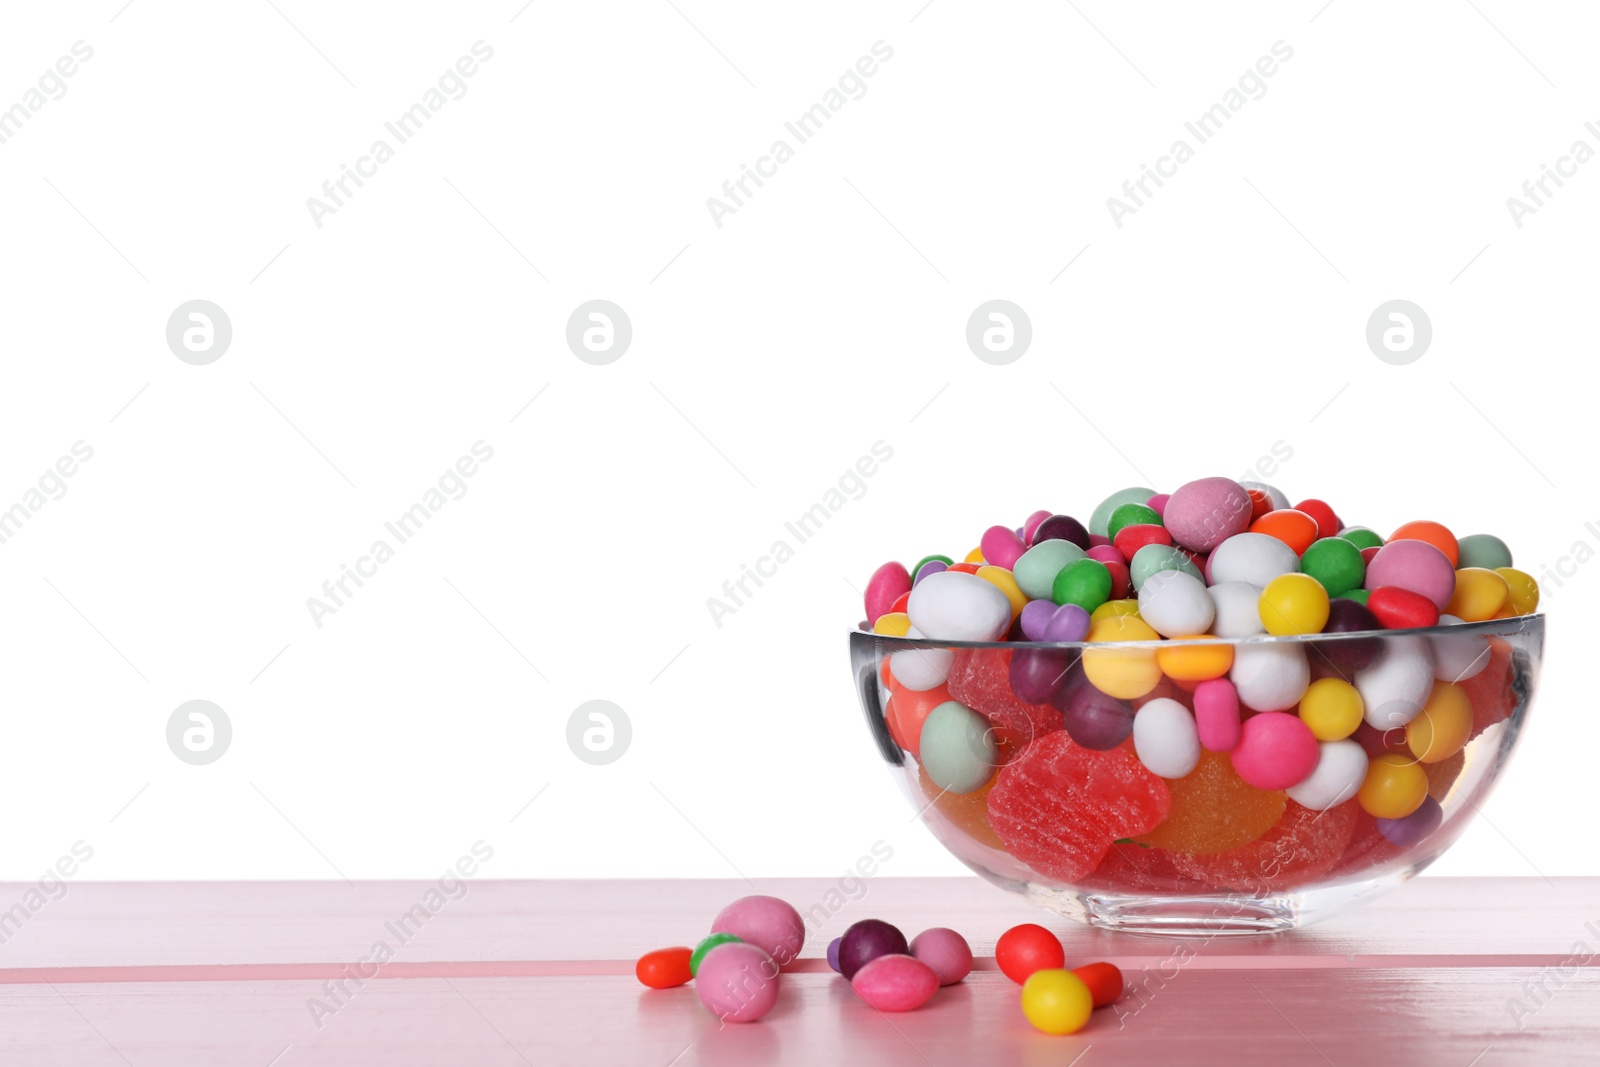 Photo of Many different candies in glass bowl on pink wooden table against white background